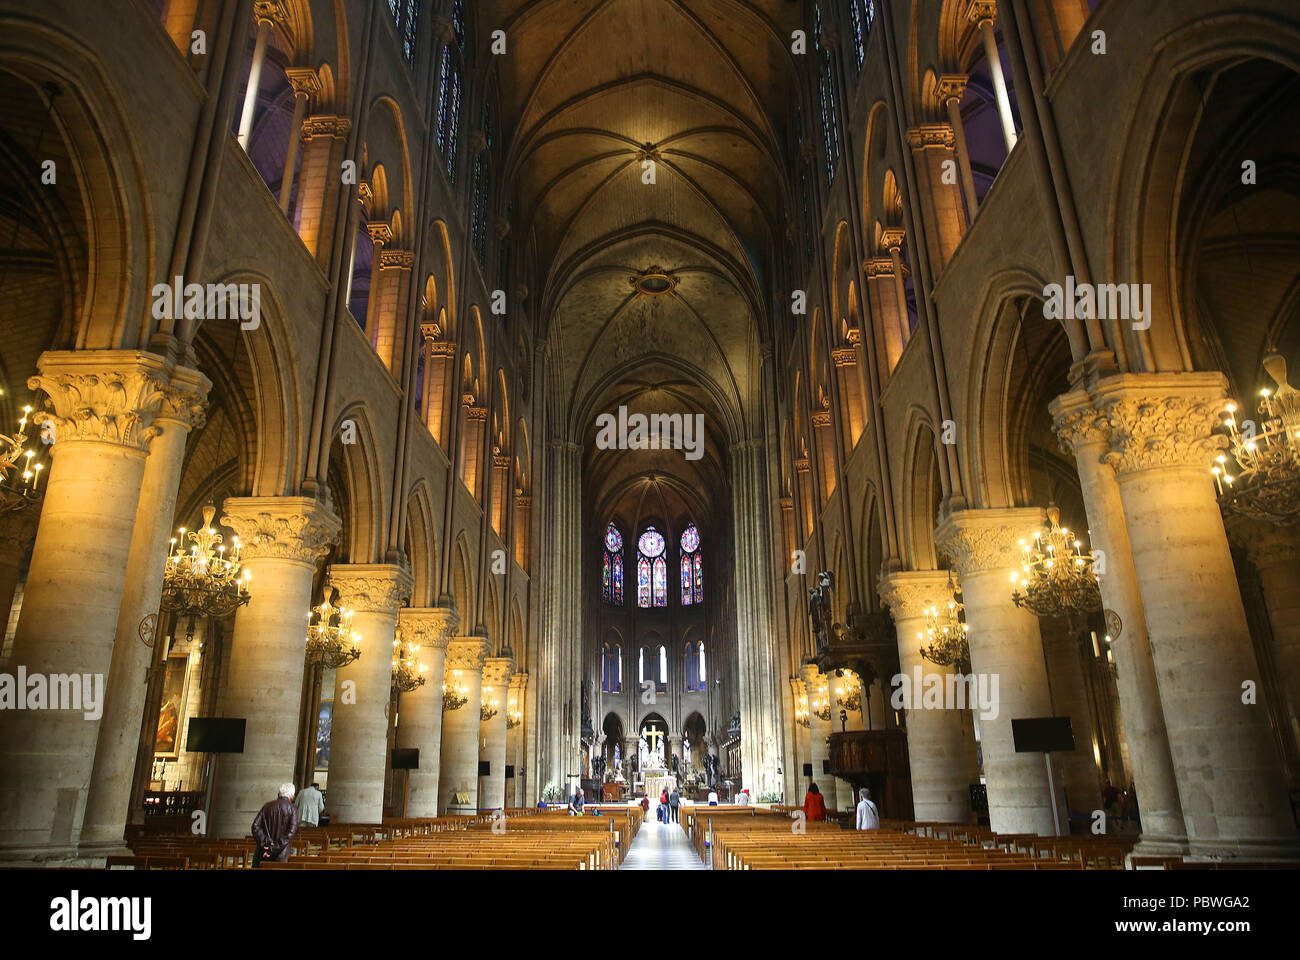 Paris, France. 22nd July, 2018. The Notre-Dame Cathedral in Paris, France.  Paris is the capital and most populous city of France, with an area of 105  square kilometres and a population of